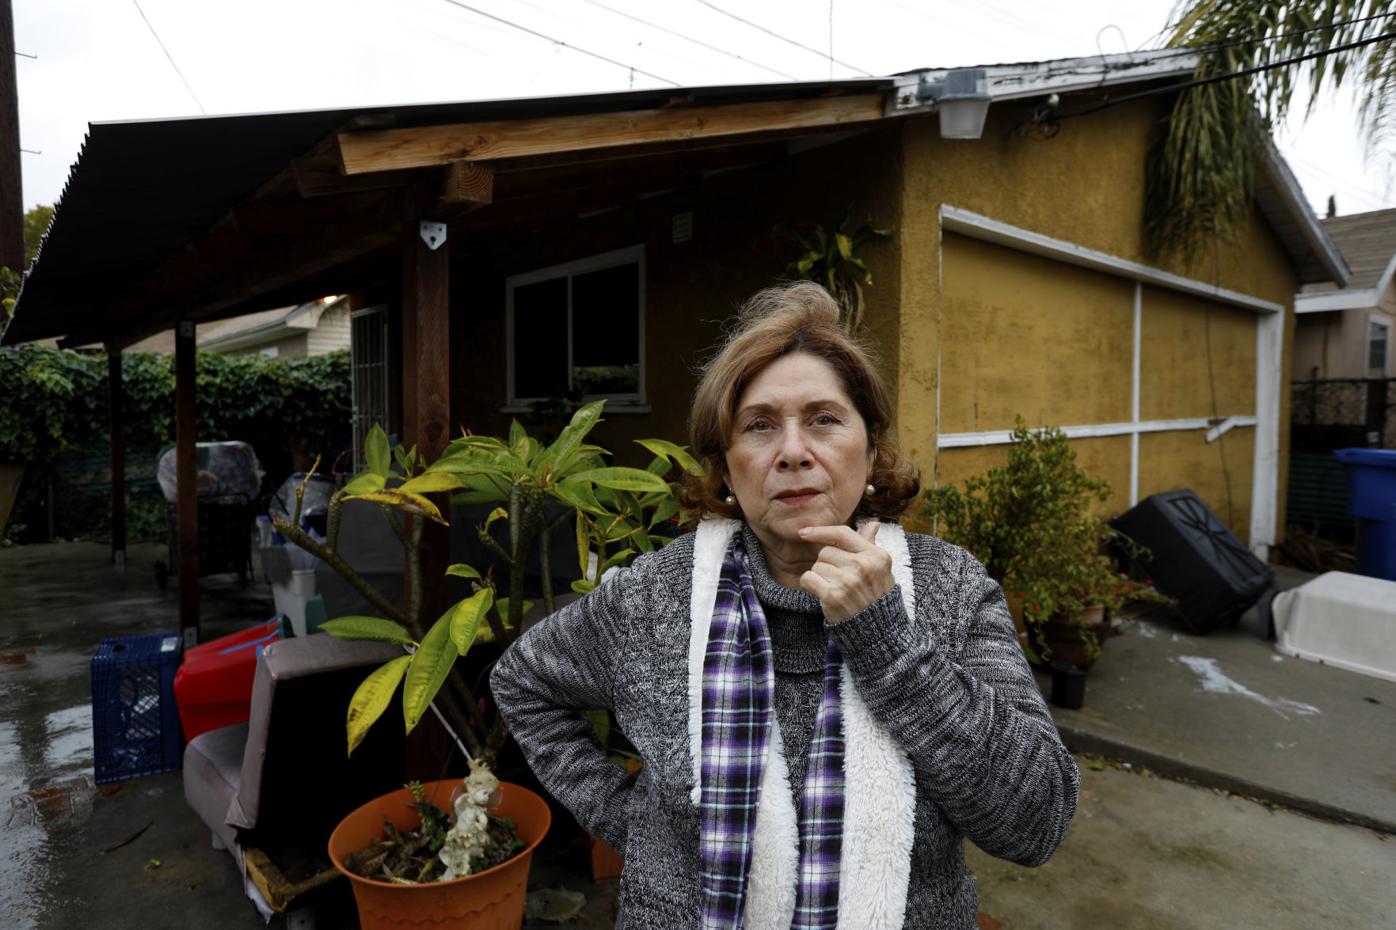 New California Laws Will Make It Easier To Build Granny Flats